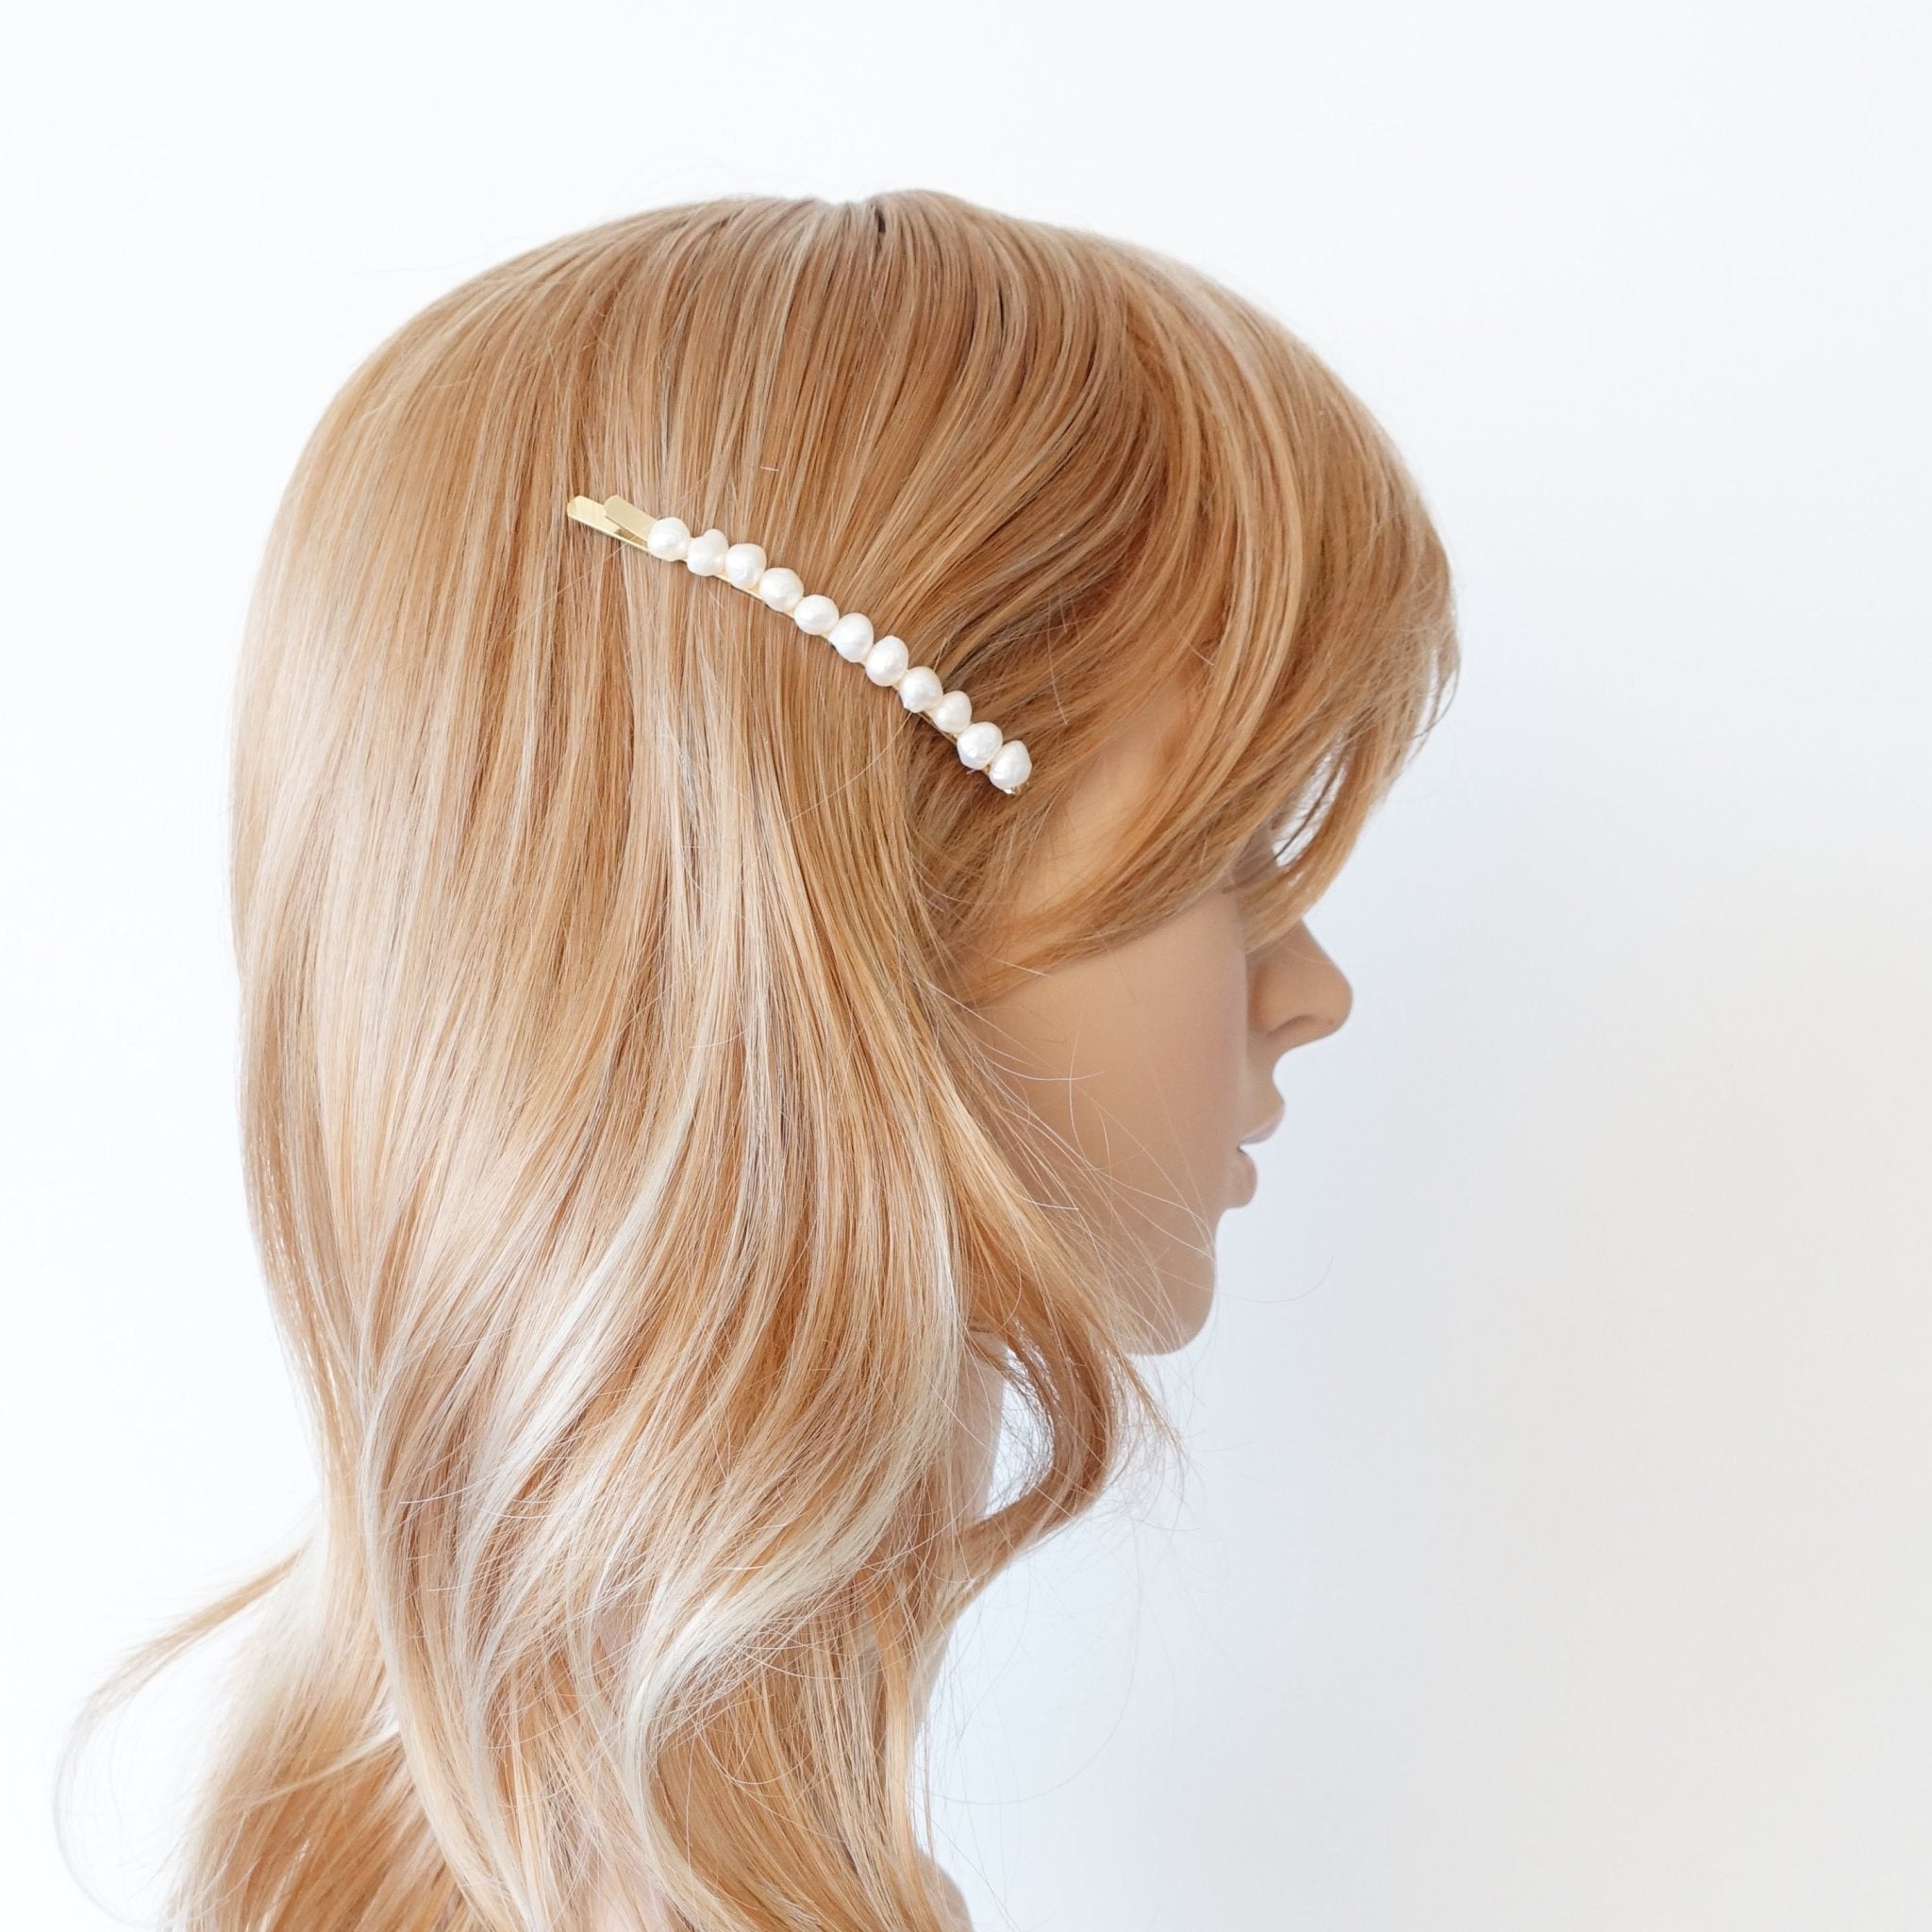 veryshine.com Barrettes & Clips a set of 2 pearl decorated hair clip women hair accessory